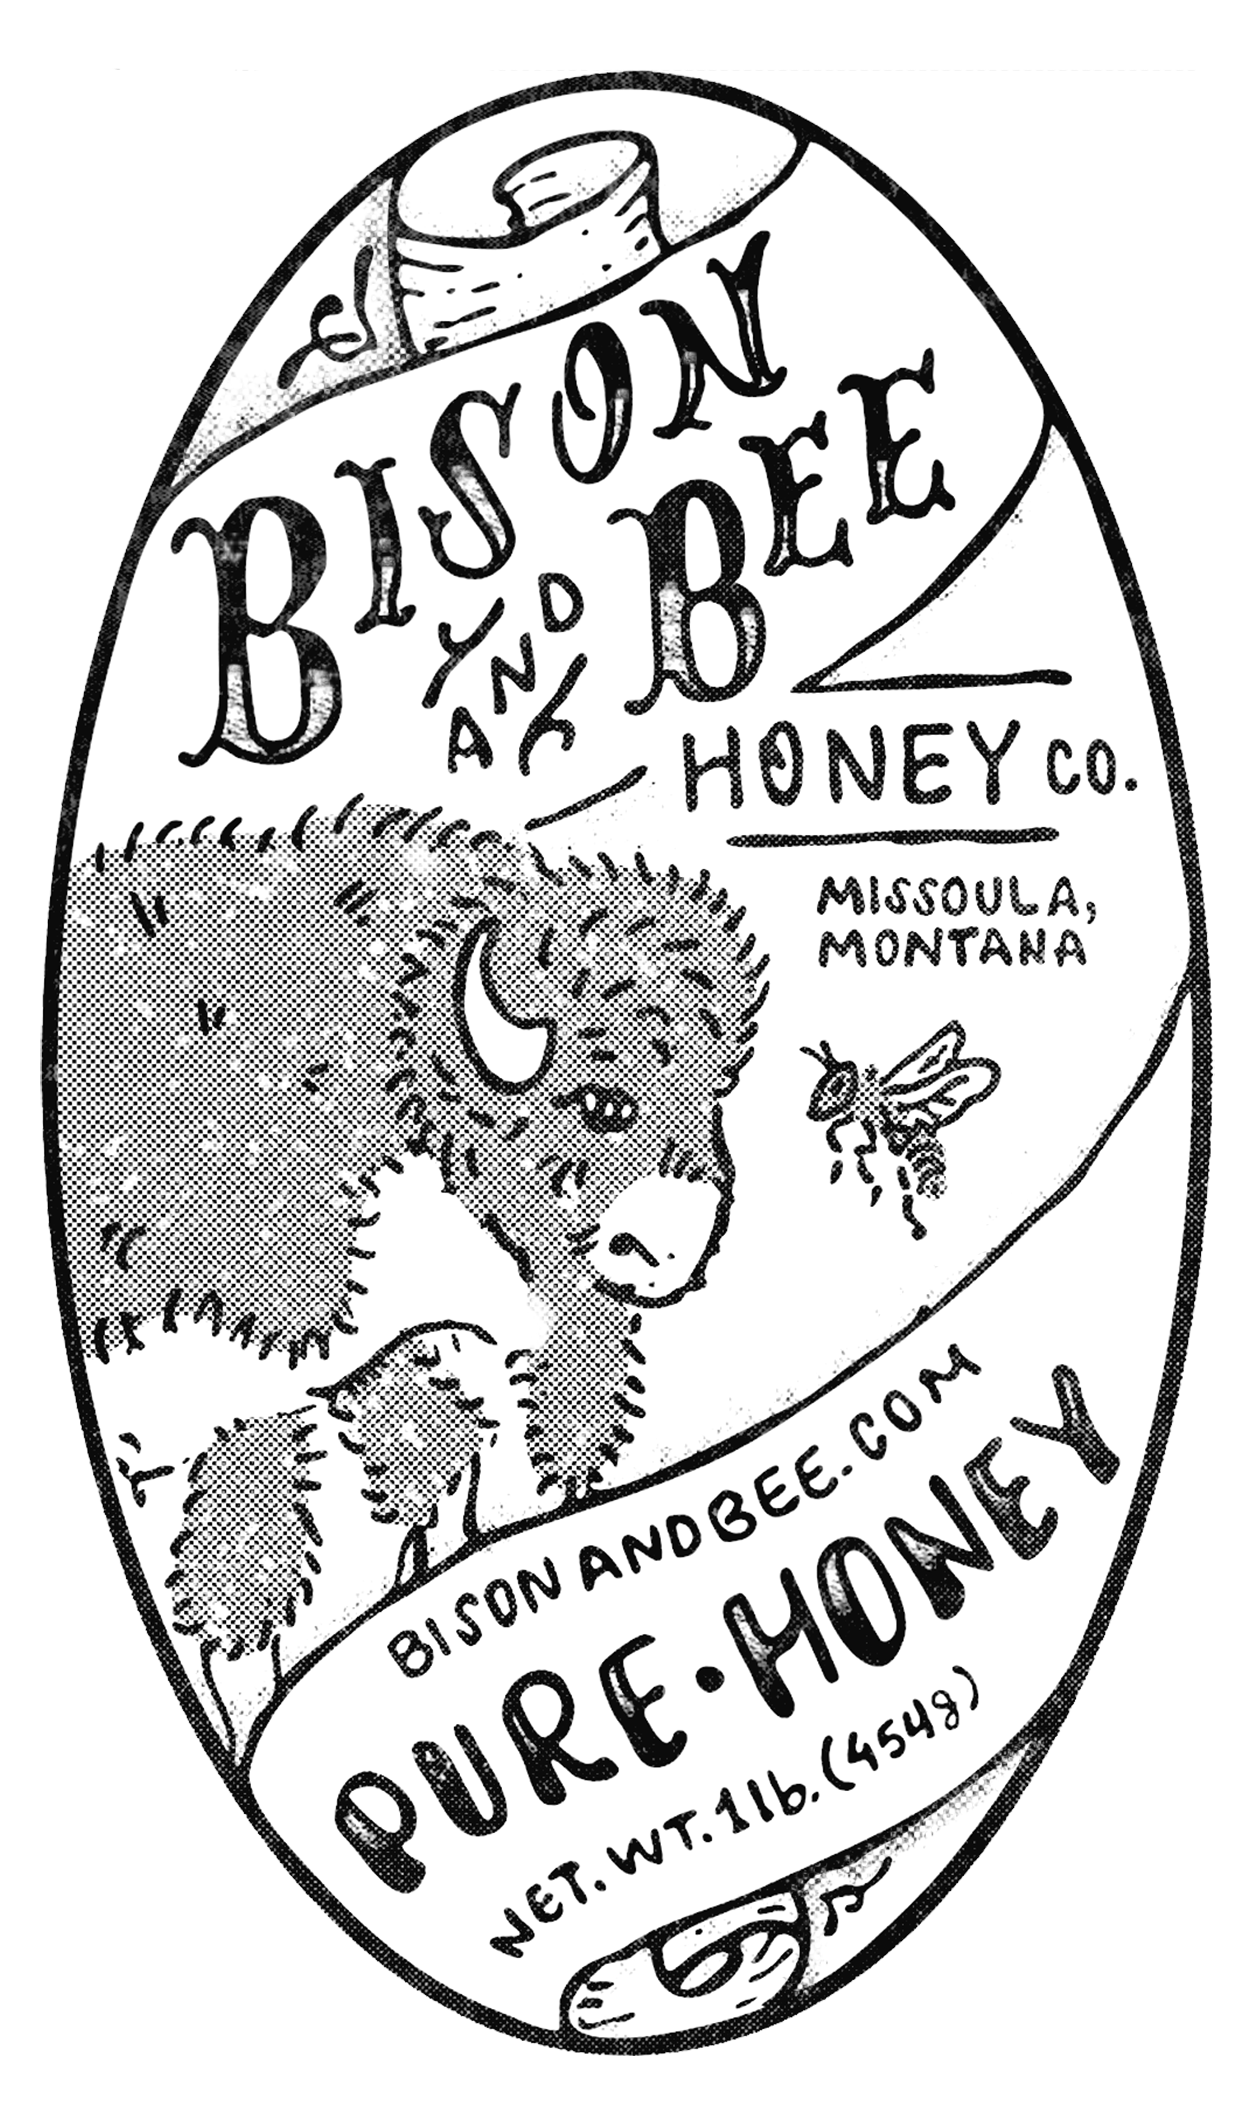 Bison and Bee Honey Co.